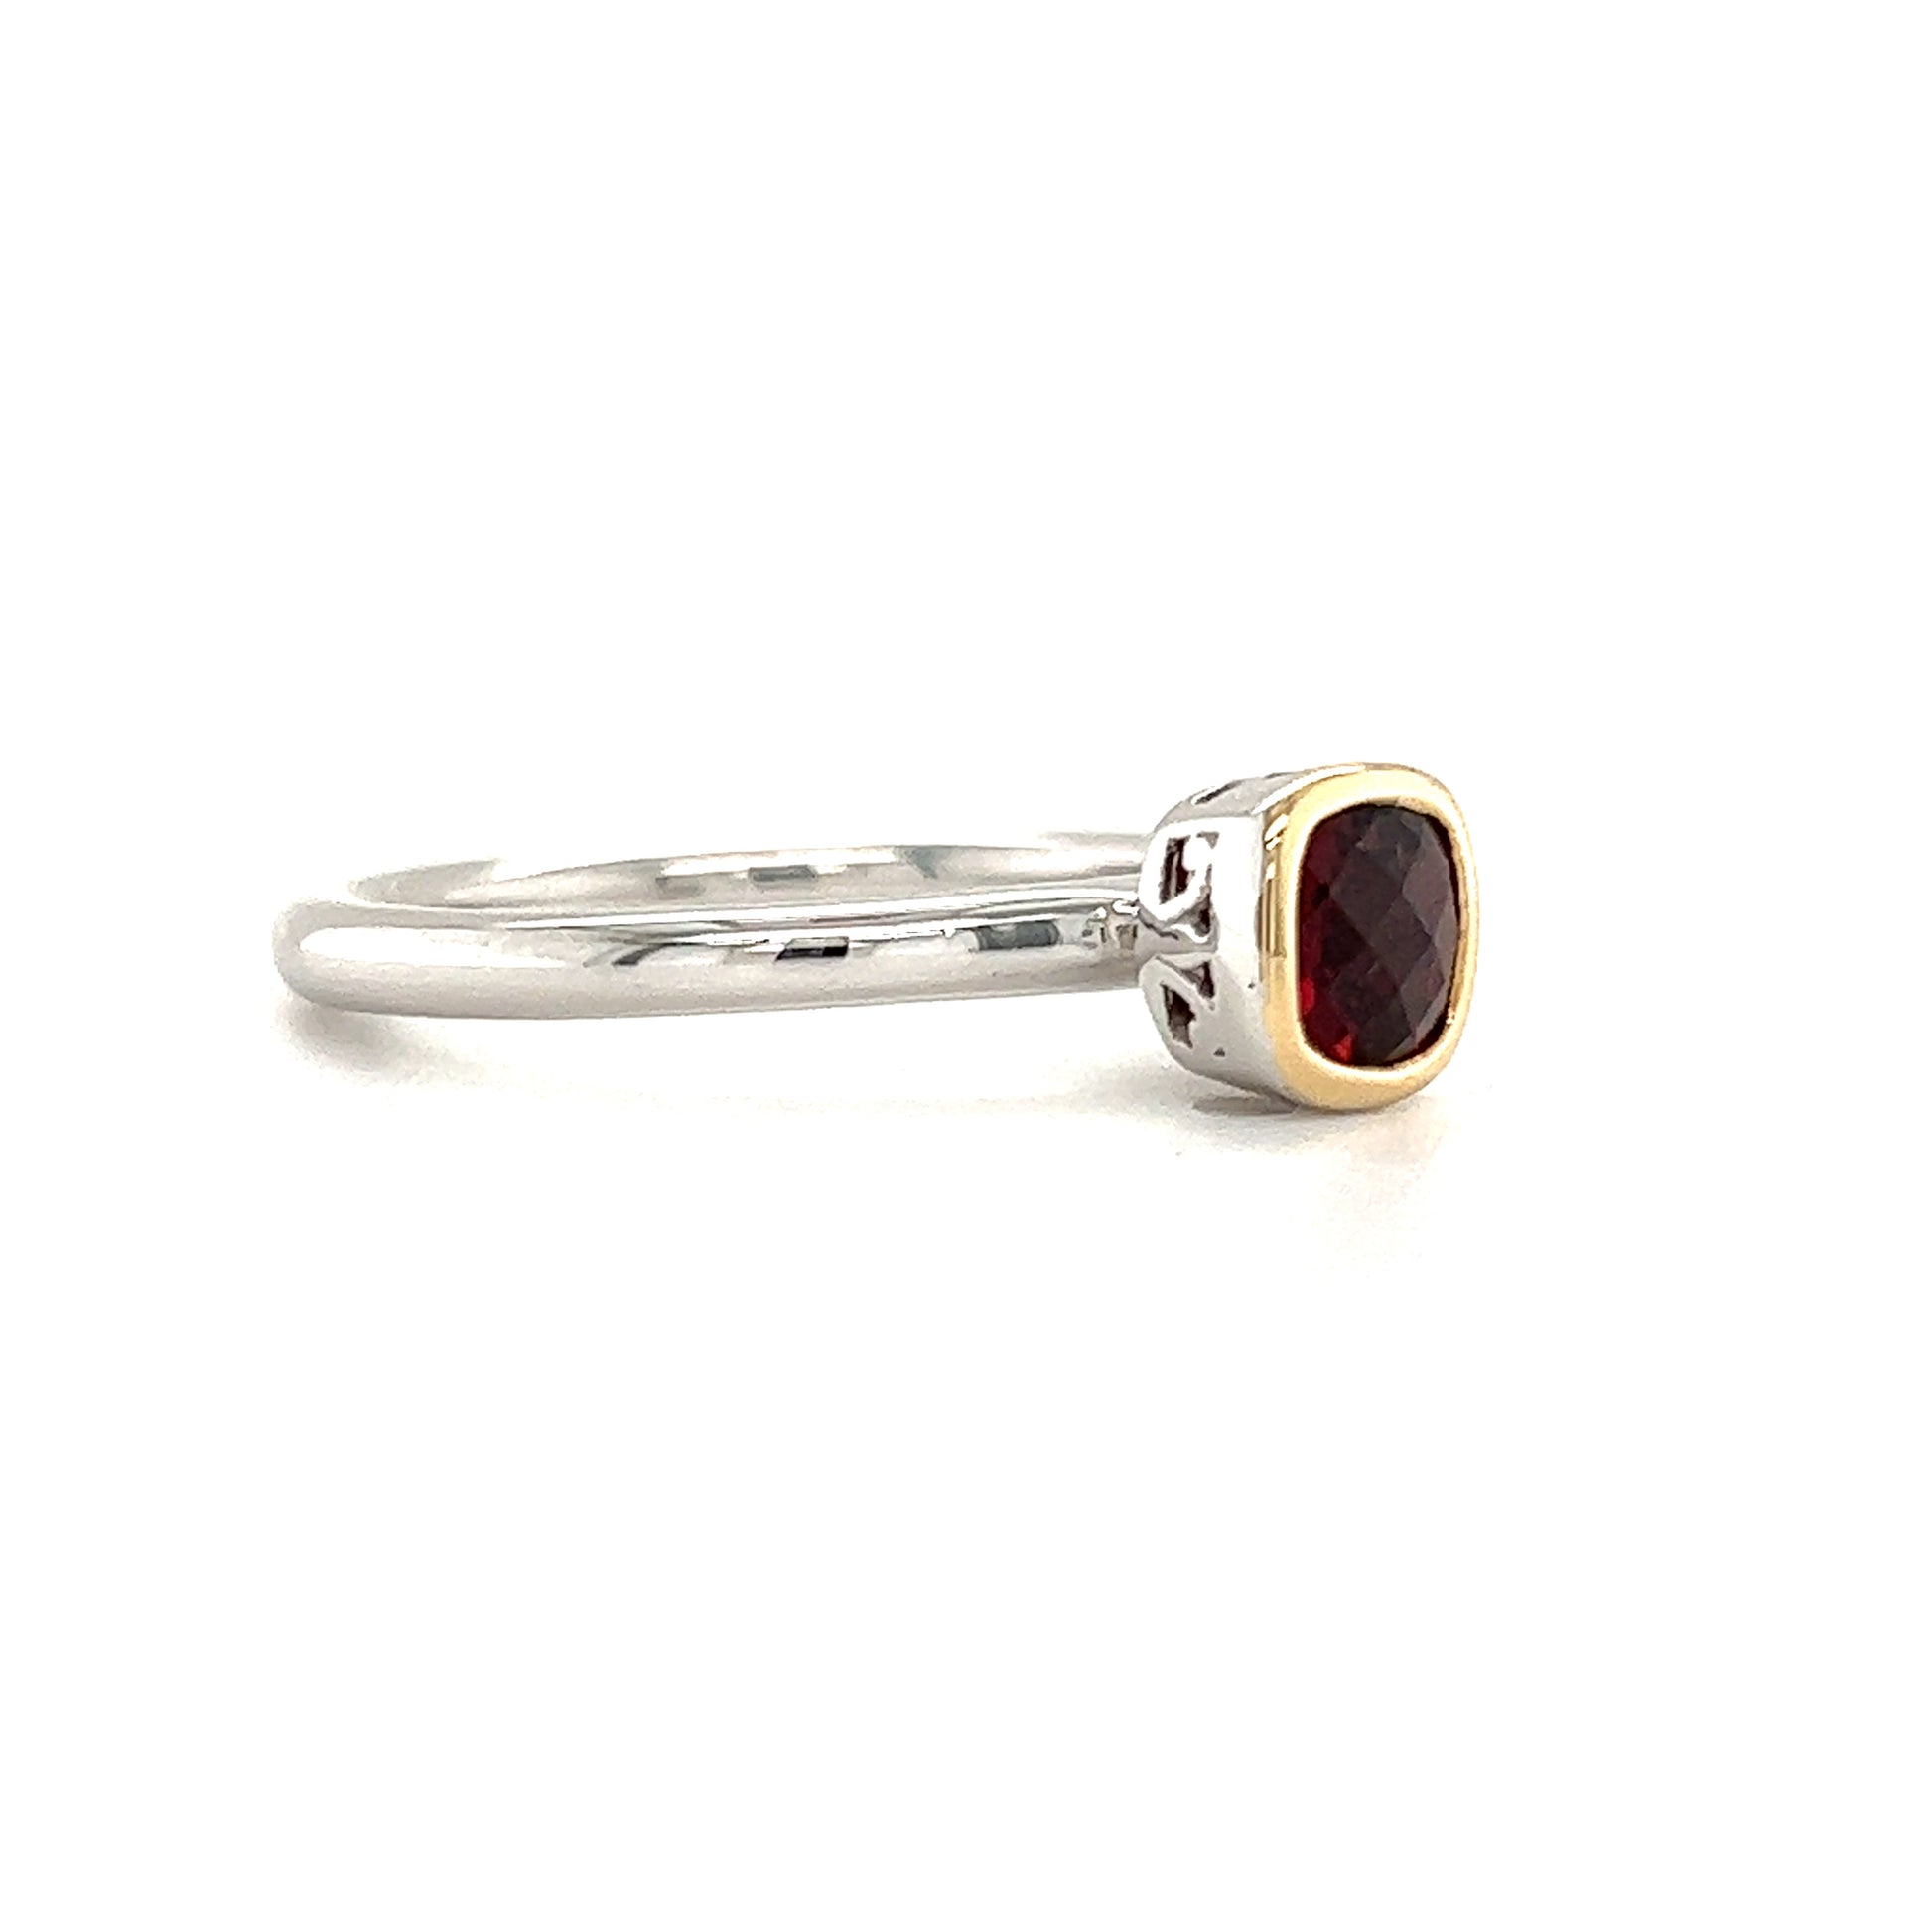 Cushion Garnet Ring in Sterling Silver with 14K Yellow Gold Accent Right Side View